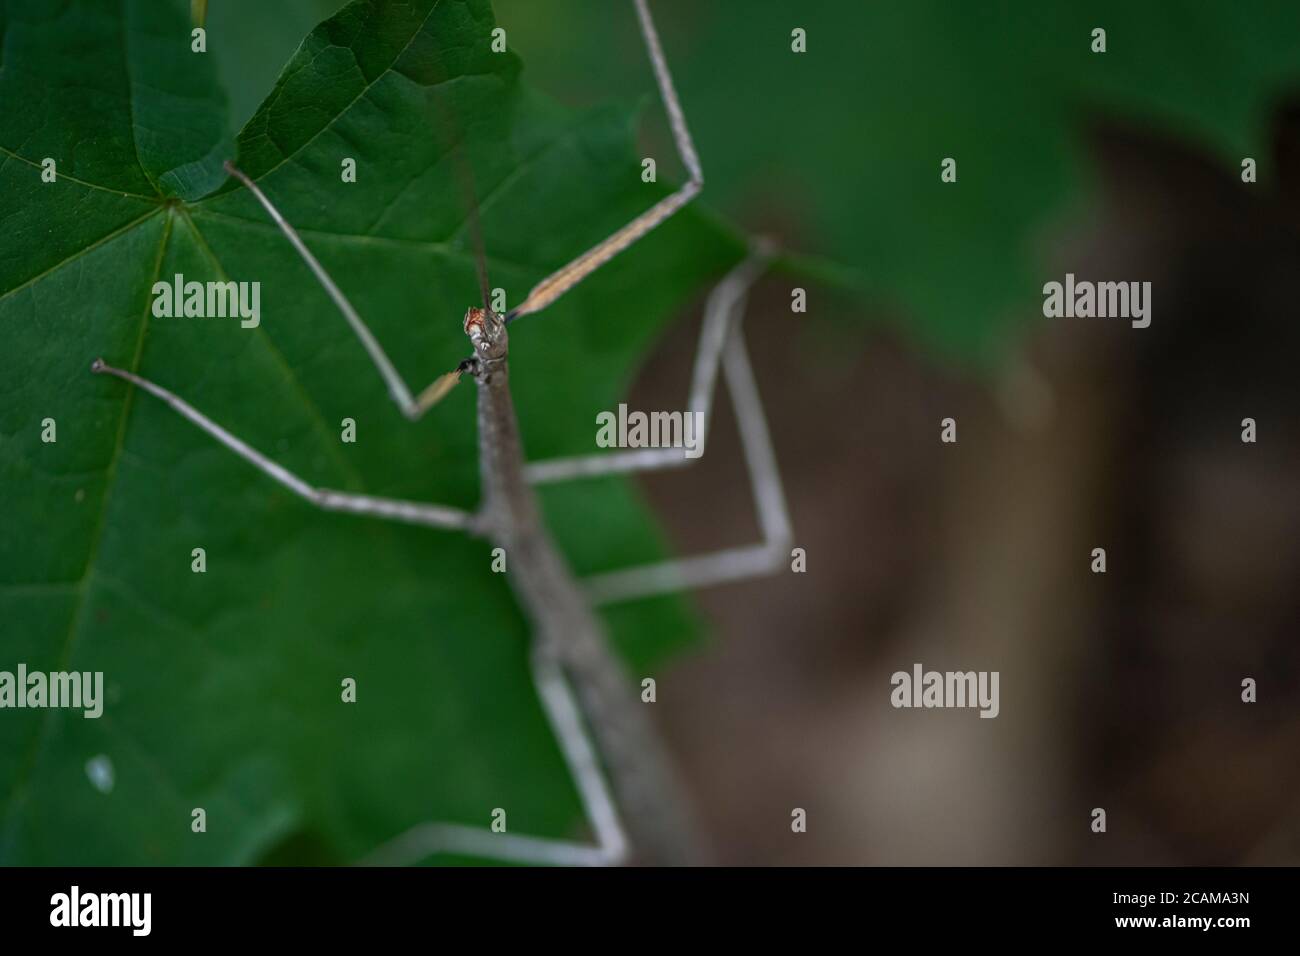 A female northern walkingstick using mimicry and camouflage to blend into its environment. Stock Photo